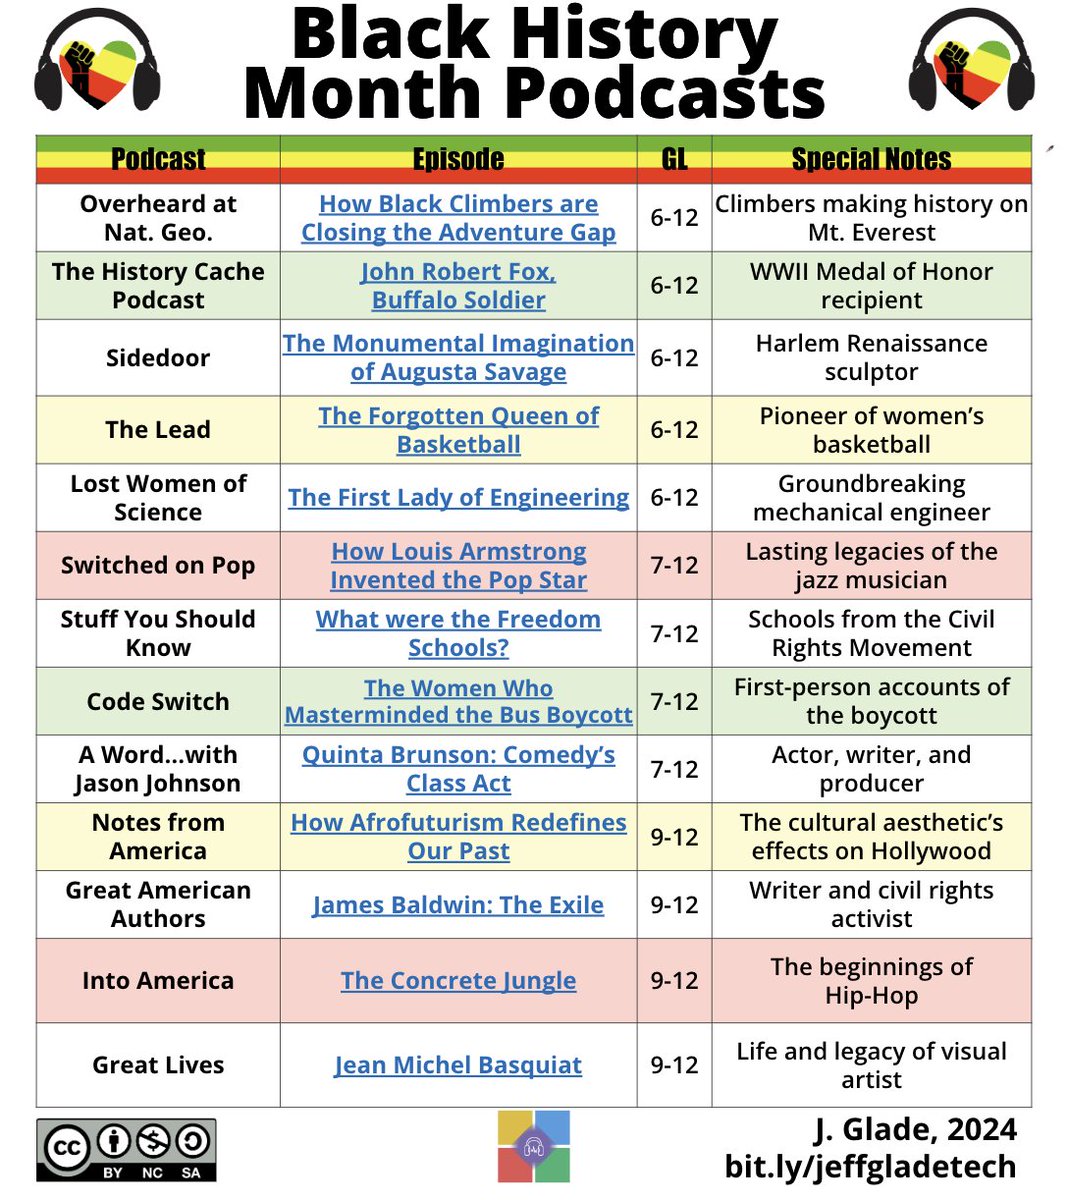 I’ve curated podcasts for #BlackHistoryMonth and beyond! These episodes celebrate Black stories, accomplishments, and joy! Options for PreK-12 include: 🎾 Athletes 🔬 Scientists 🎶 Music 🔥 Trailblazers ‼️ Lots more Full, free list ⬇️ bit.ly/BlackHistoryMo… #FETC #TCEA